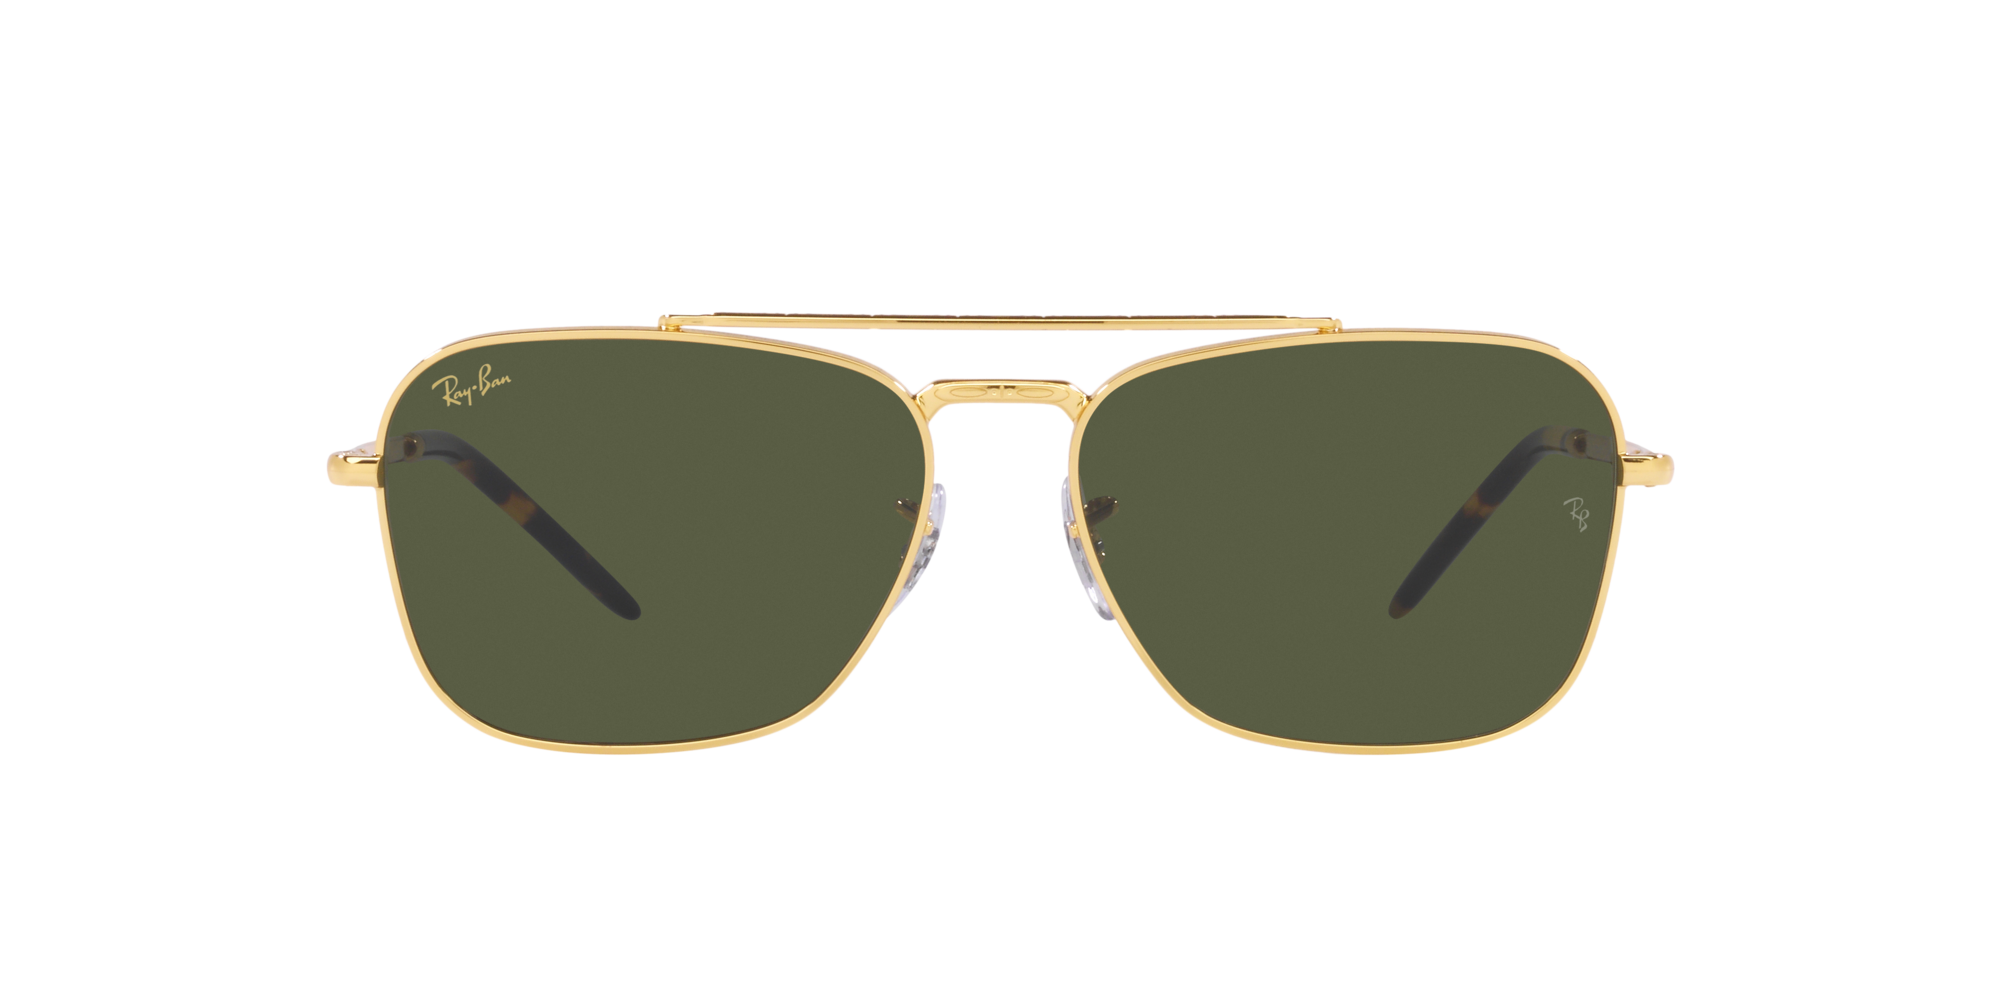 New Caravan Ray Ban Unisex Sonnenbrille in Gold RB3636 919631 58